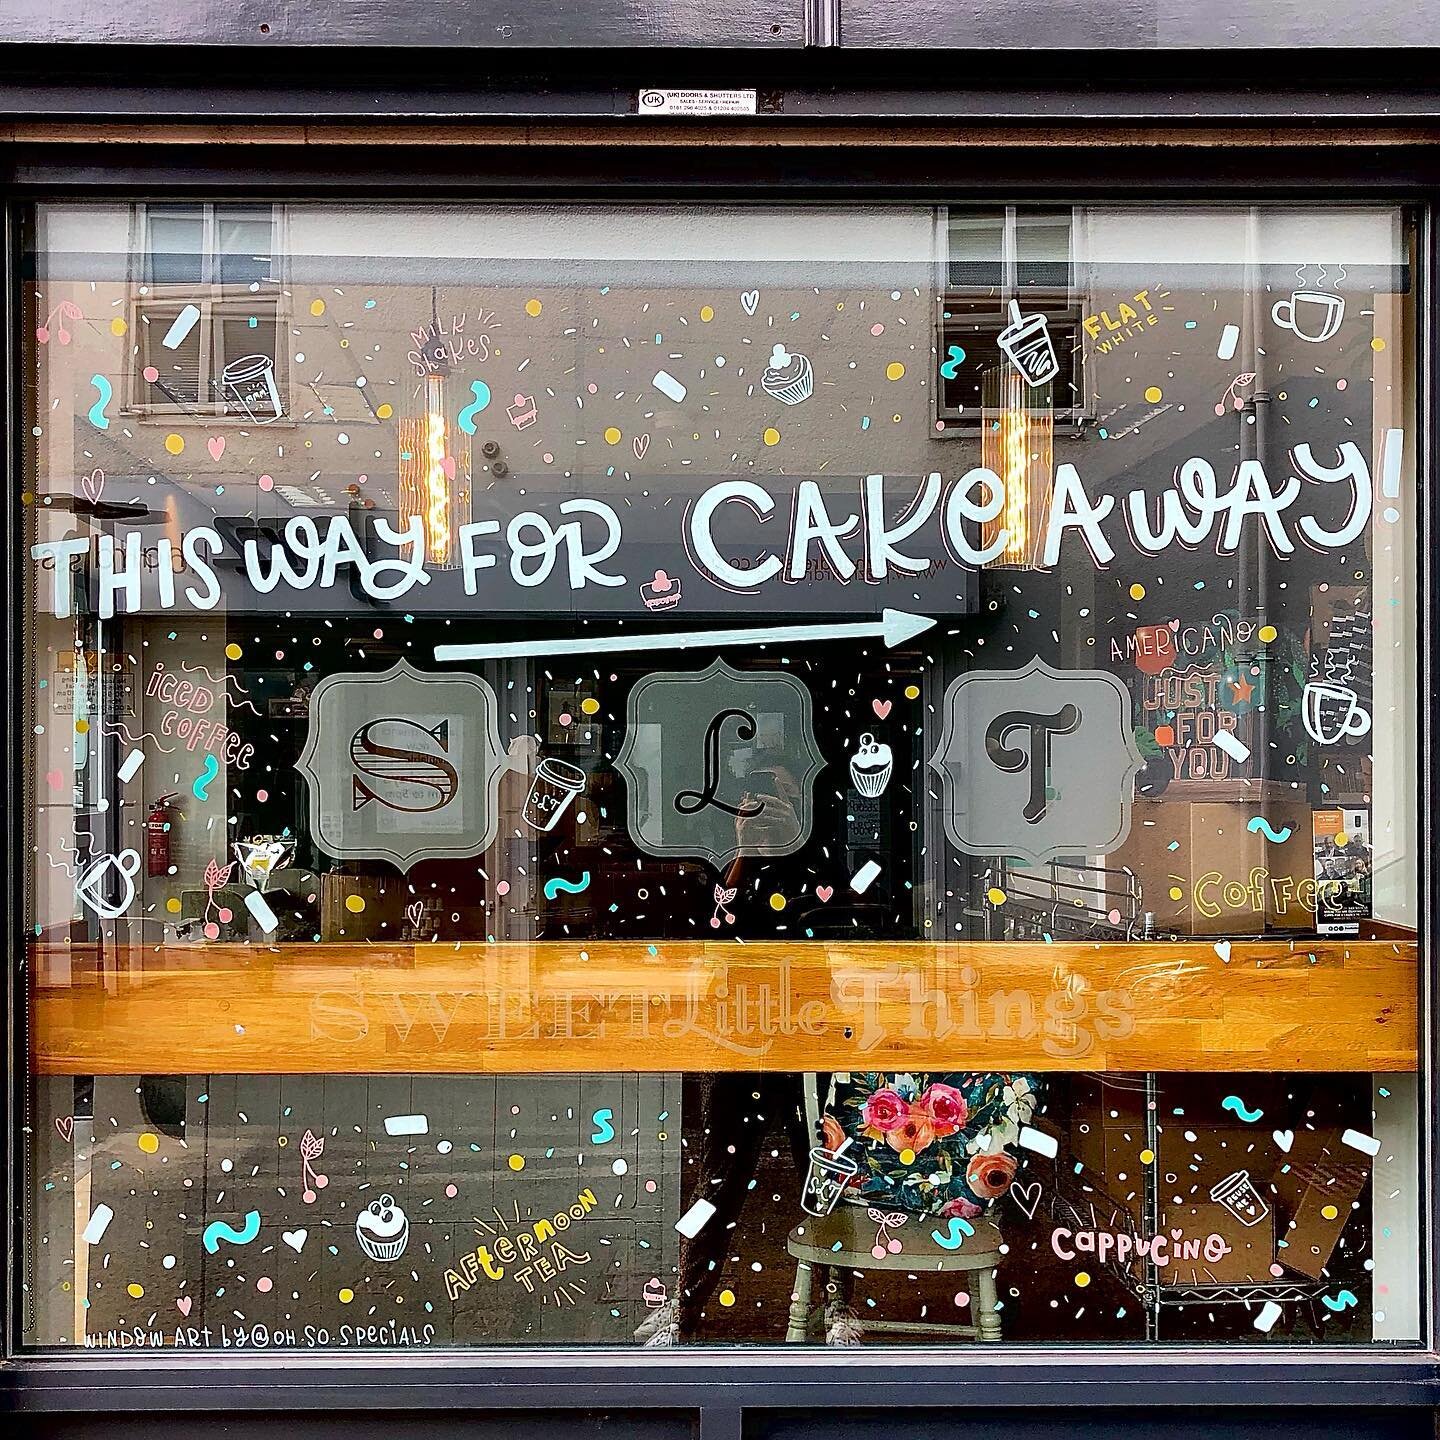 Get to pay this sweet little place a visit today! Just a couple of updates to their windows ready for next week 🤩 Unlikely I&rsquo;ll leave without *having* to sample a few delicious baked goods too.. see you soon @sltcupcakes 🧁🧁🧁

#windowArt #wi